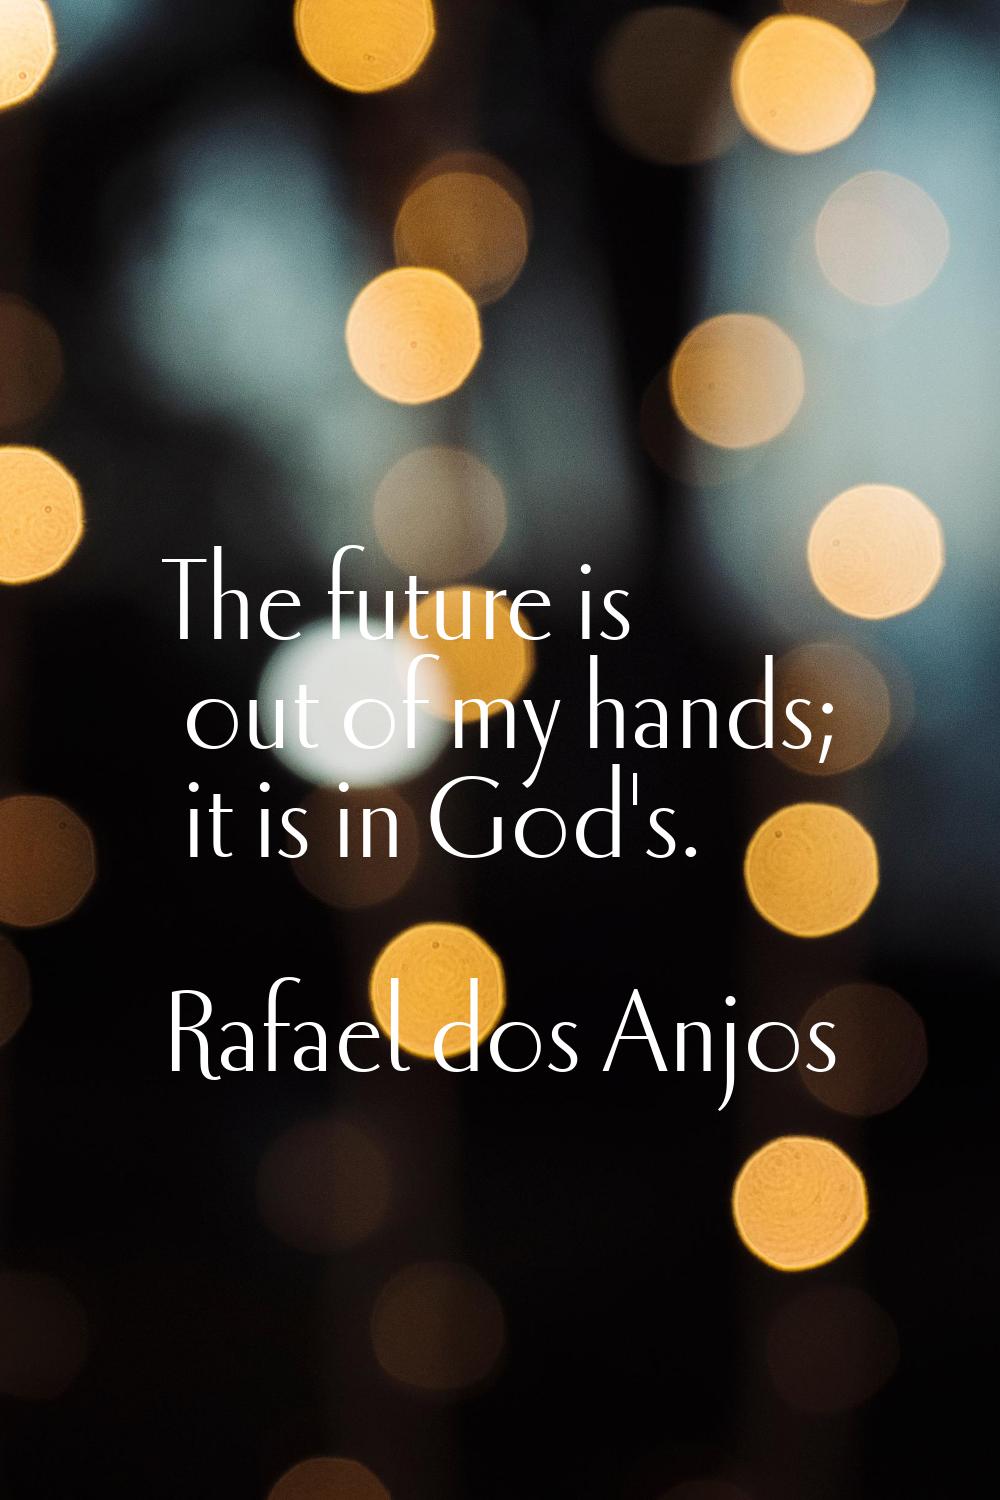 The future is out of my hands; it is in God's.